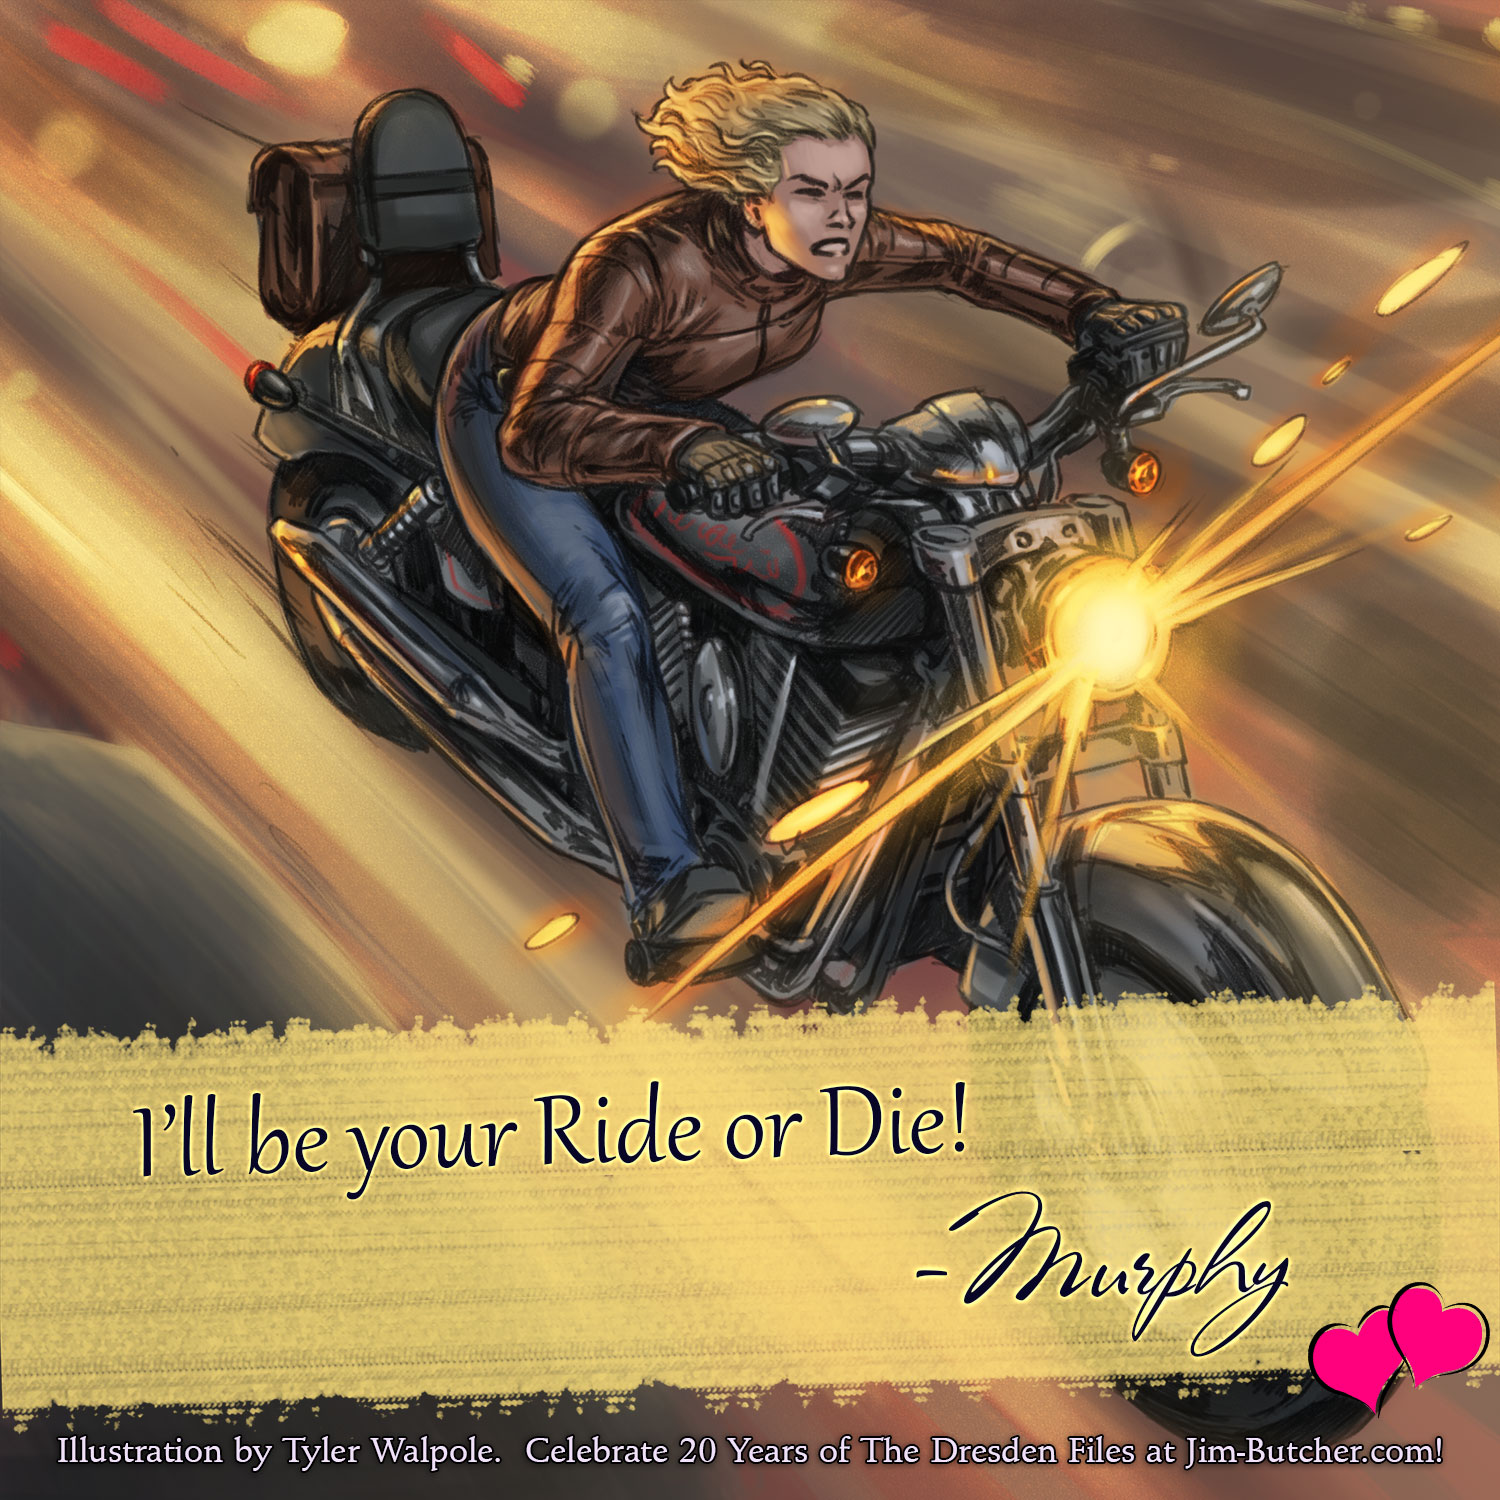 Murphy: I'll be your Ride or Die!